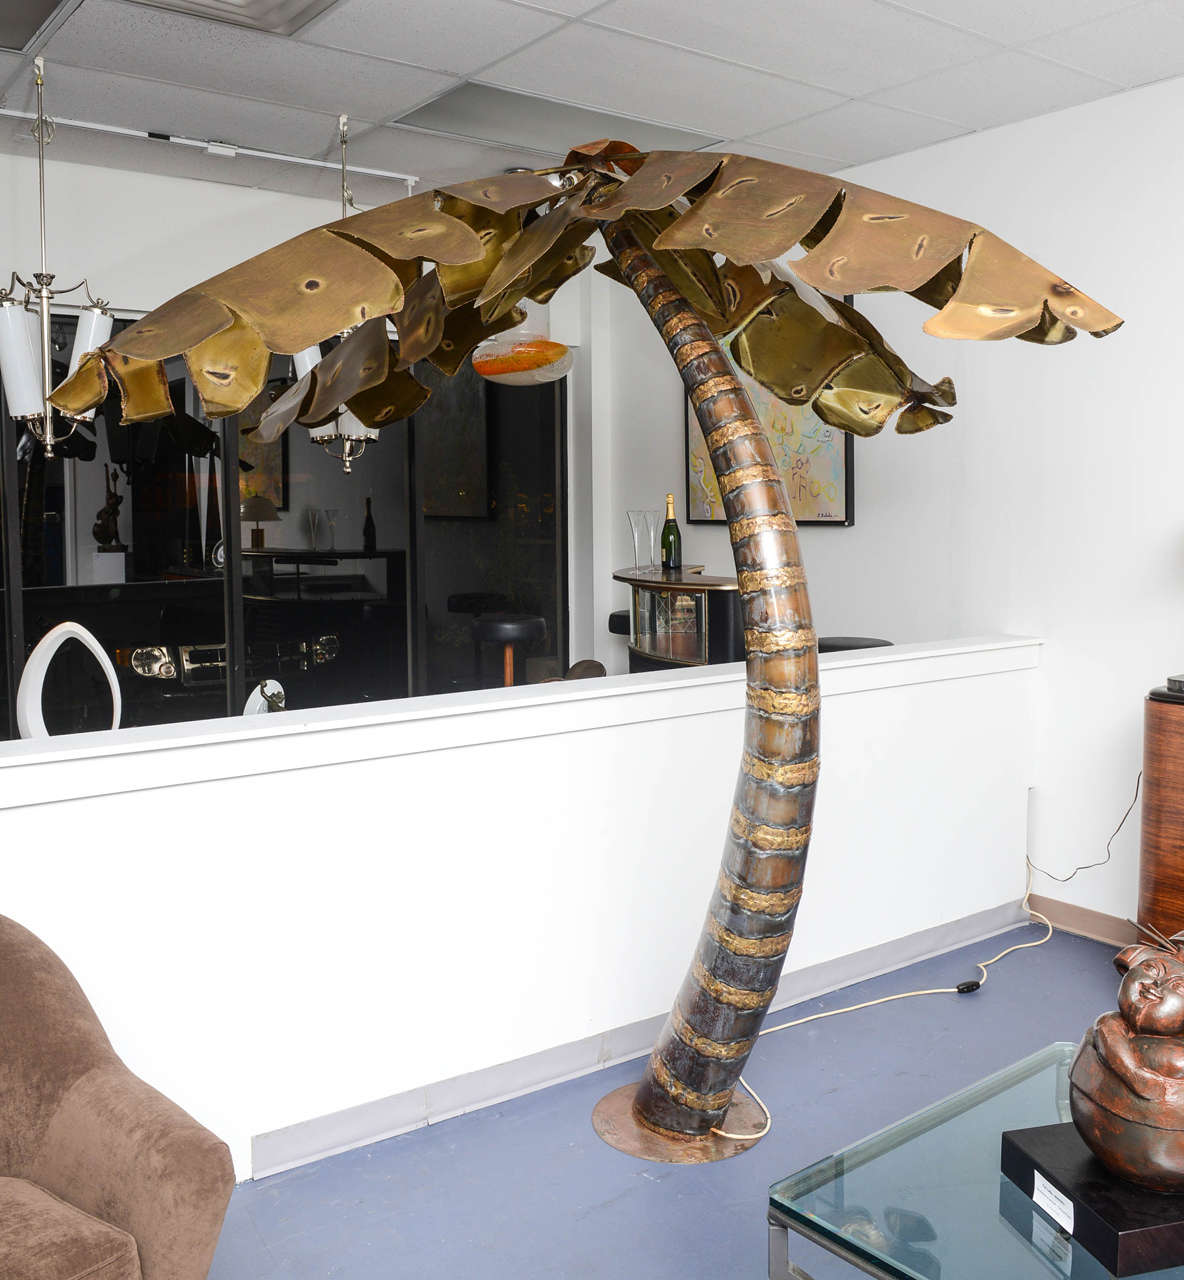 Life size banana tree in copper leaves , sculptural  Floor Lamp ,in the exact style of Duval Brasseur.
4 spotlights or normal lights in the upper part of the trunk,under the leaves.
Very interesting design , the craftsmanshift is perfect on the